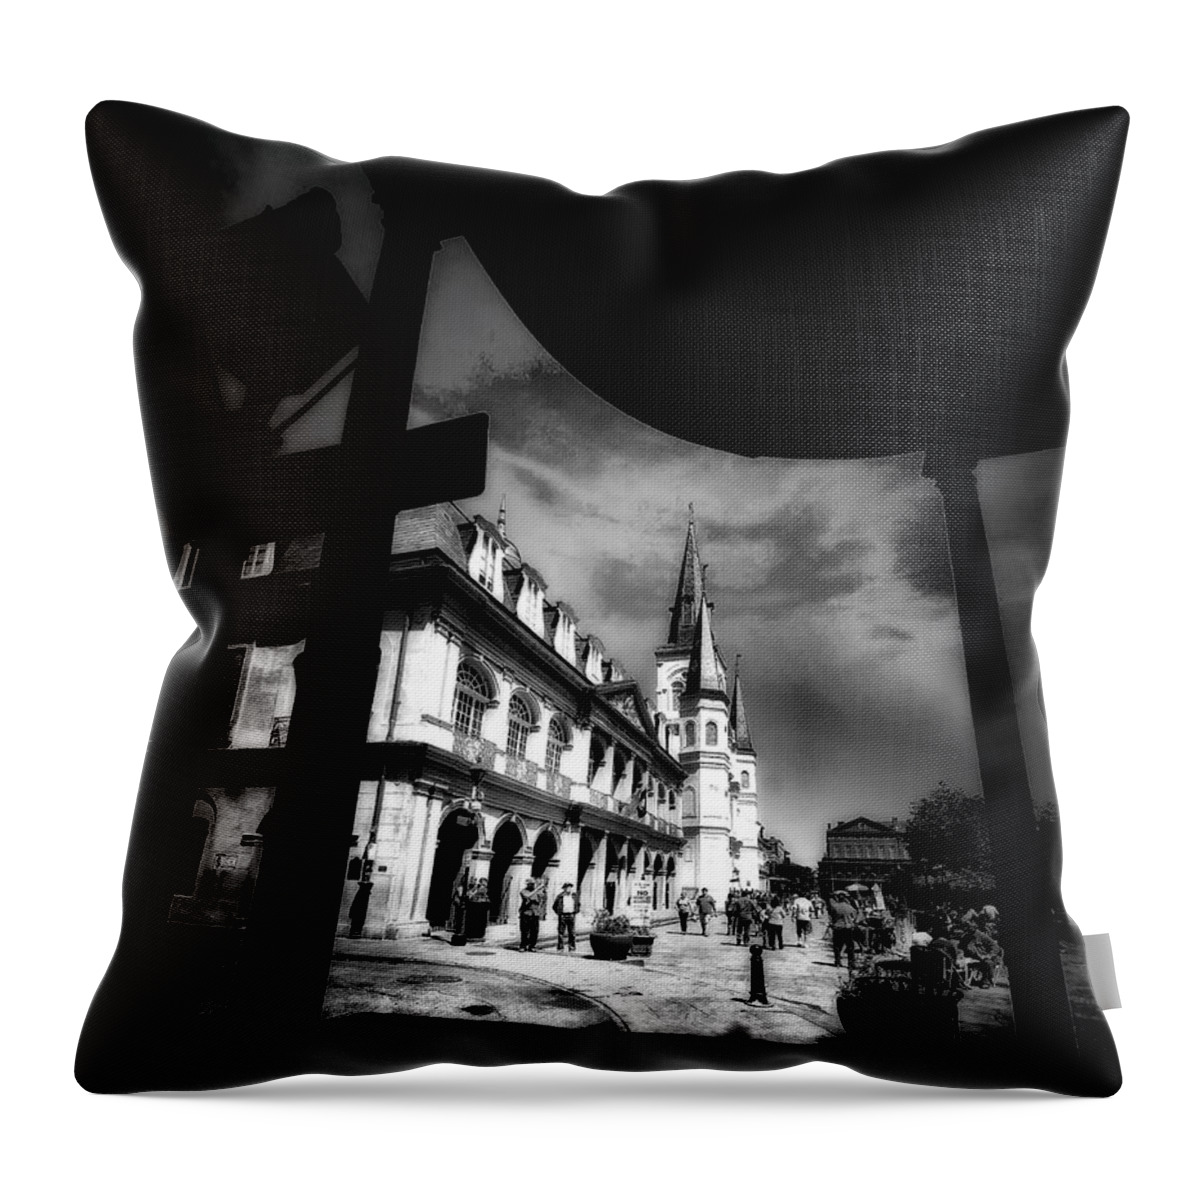 Architectural Art Throw Pillow featuring the photograph Round Corner by Robert McCubbin